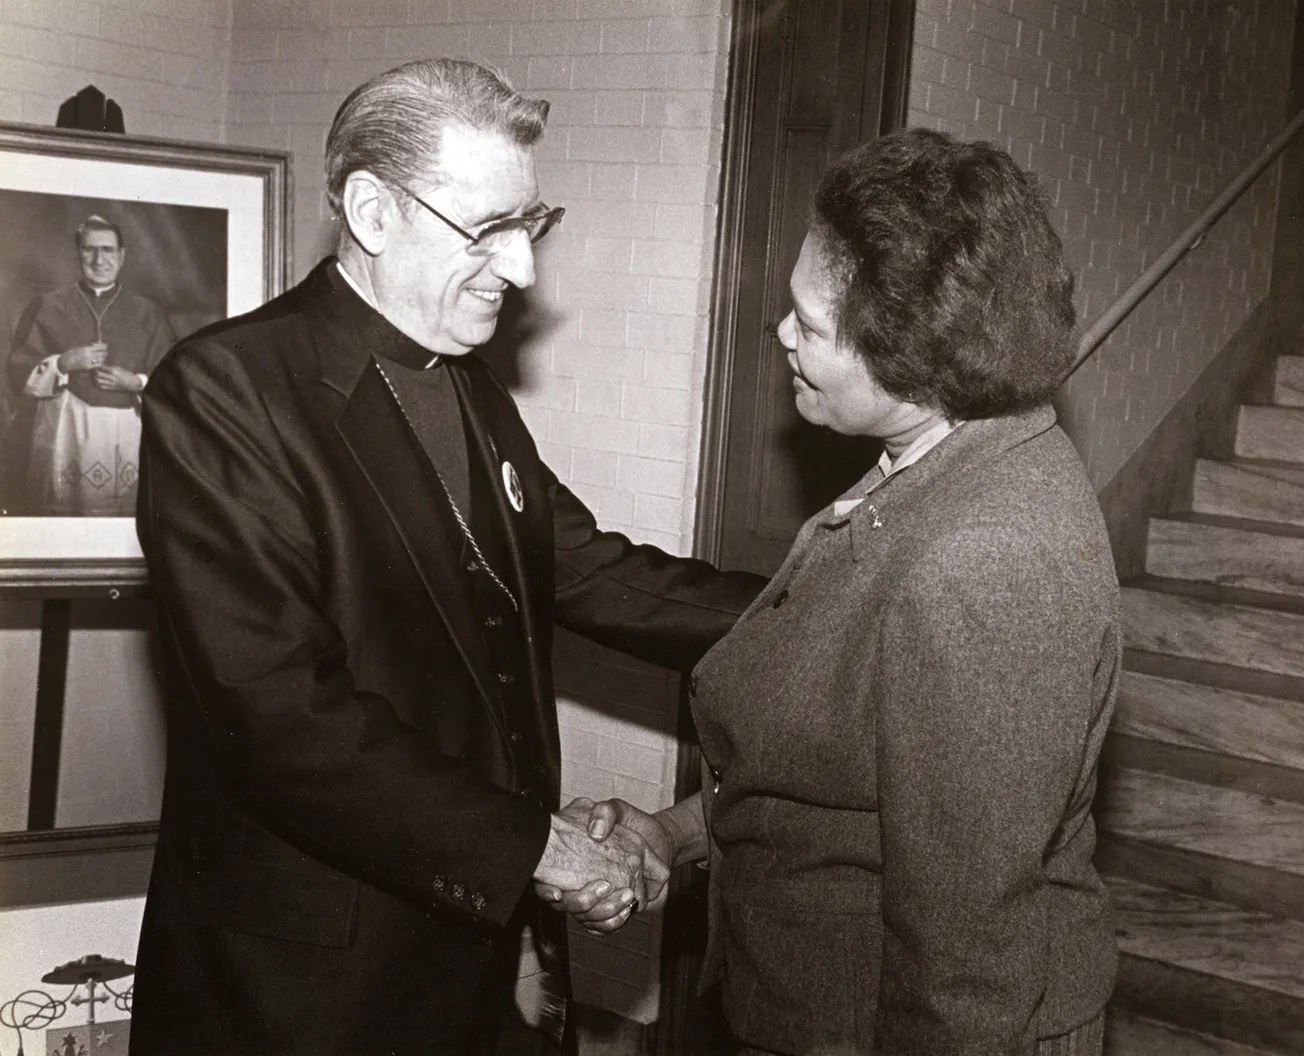 Remembering Dolores B. Grier, Black activist against abortion and pioneering diocesan official